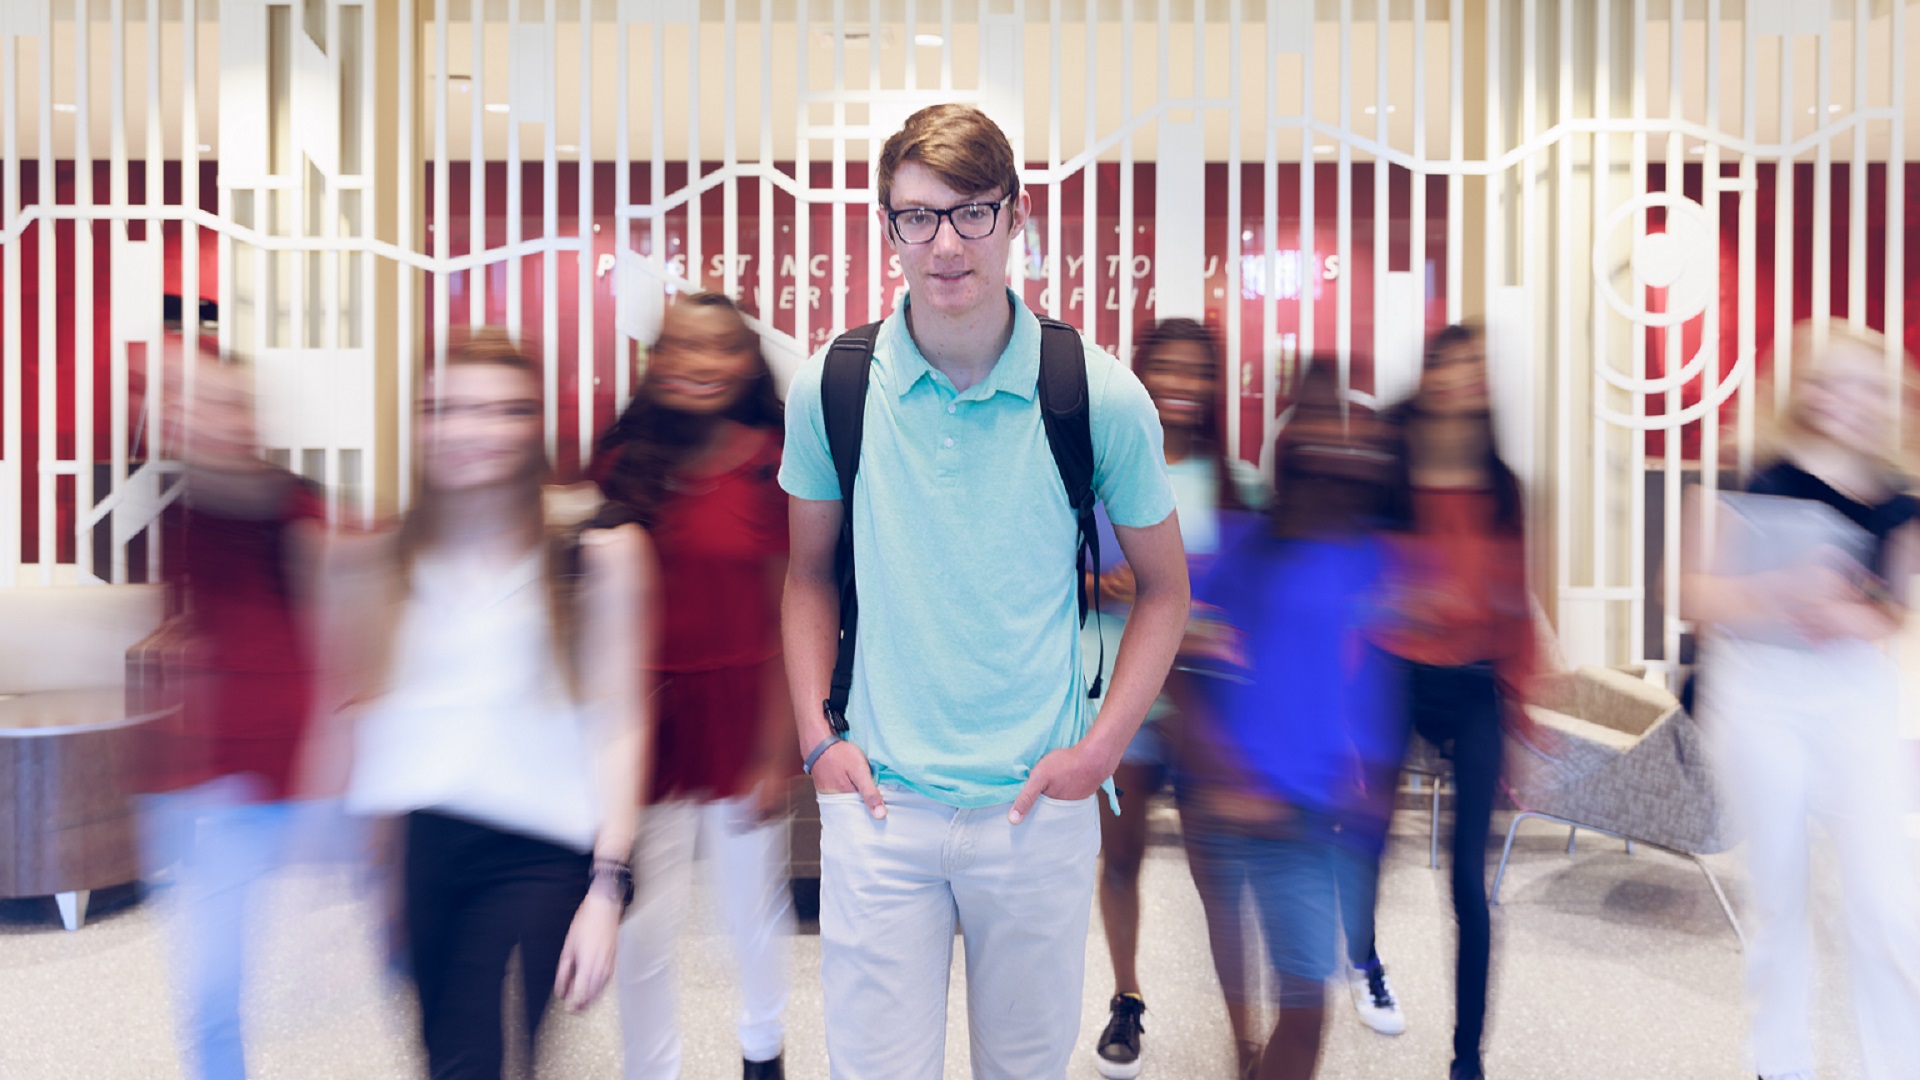 Confident student walks toward the camera as other students pass by in a blur